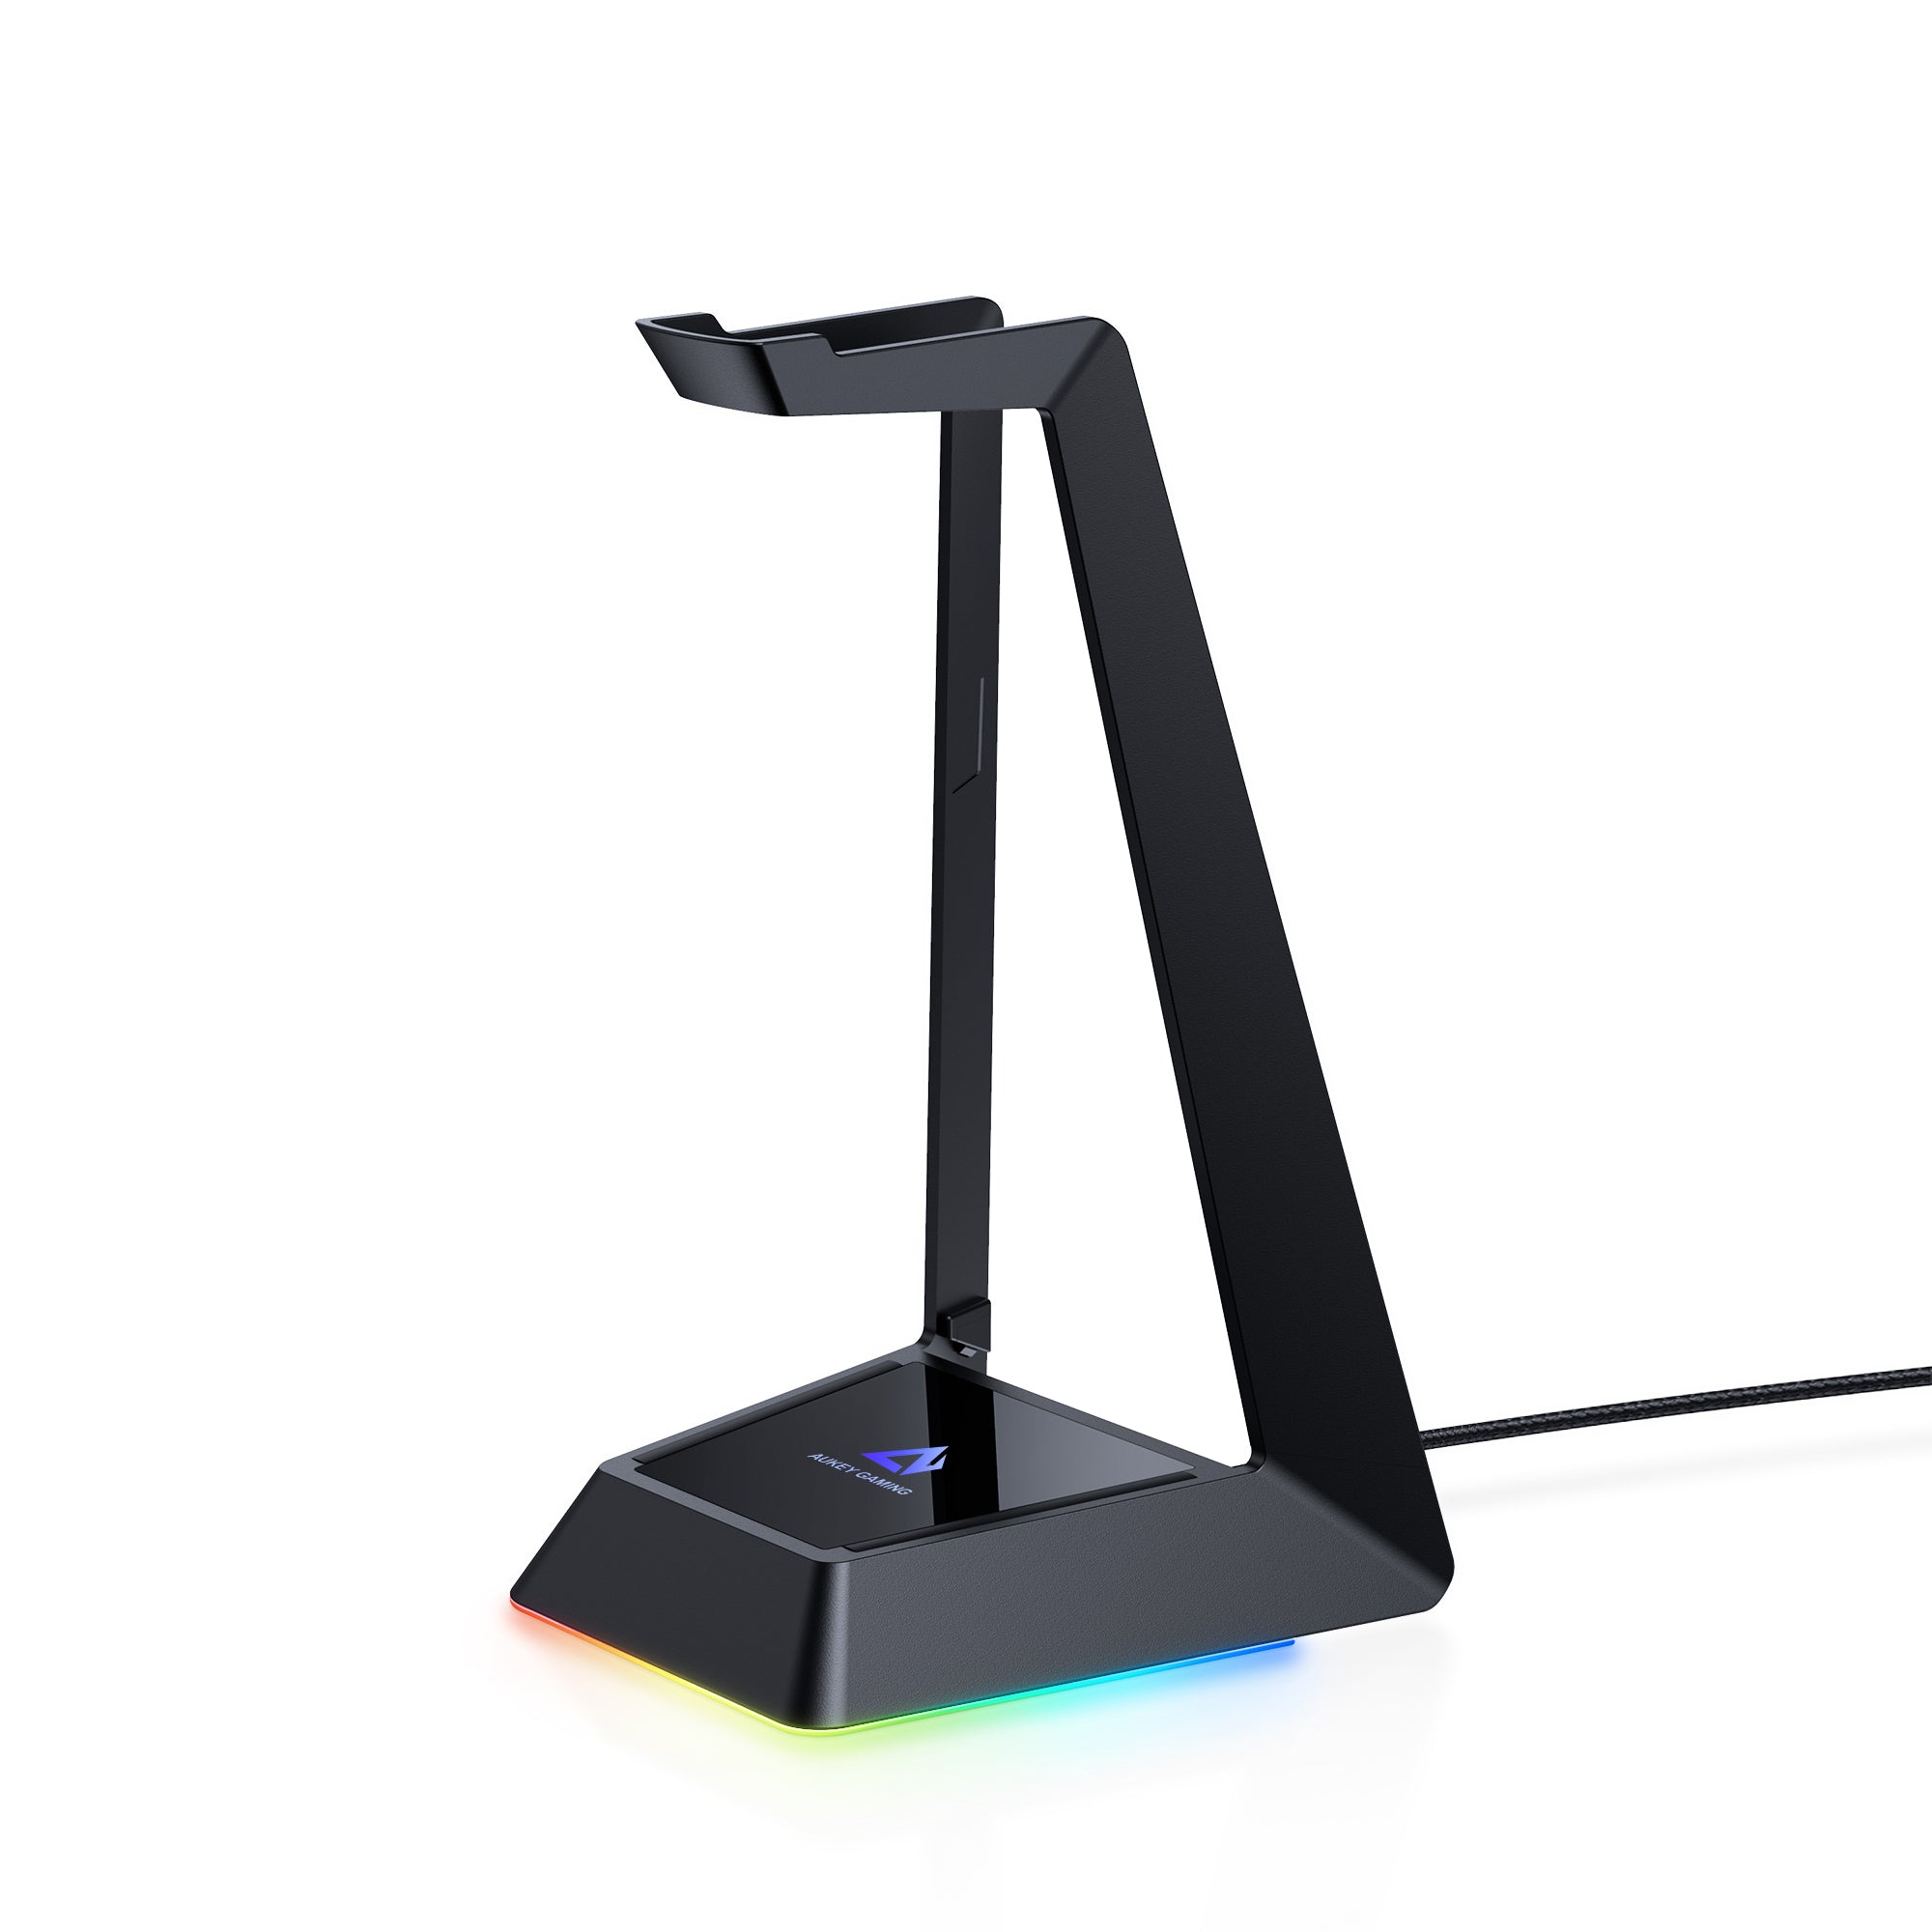 GH-S8 RGB Gaming Headset Stand with 3 USB Ports